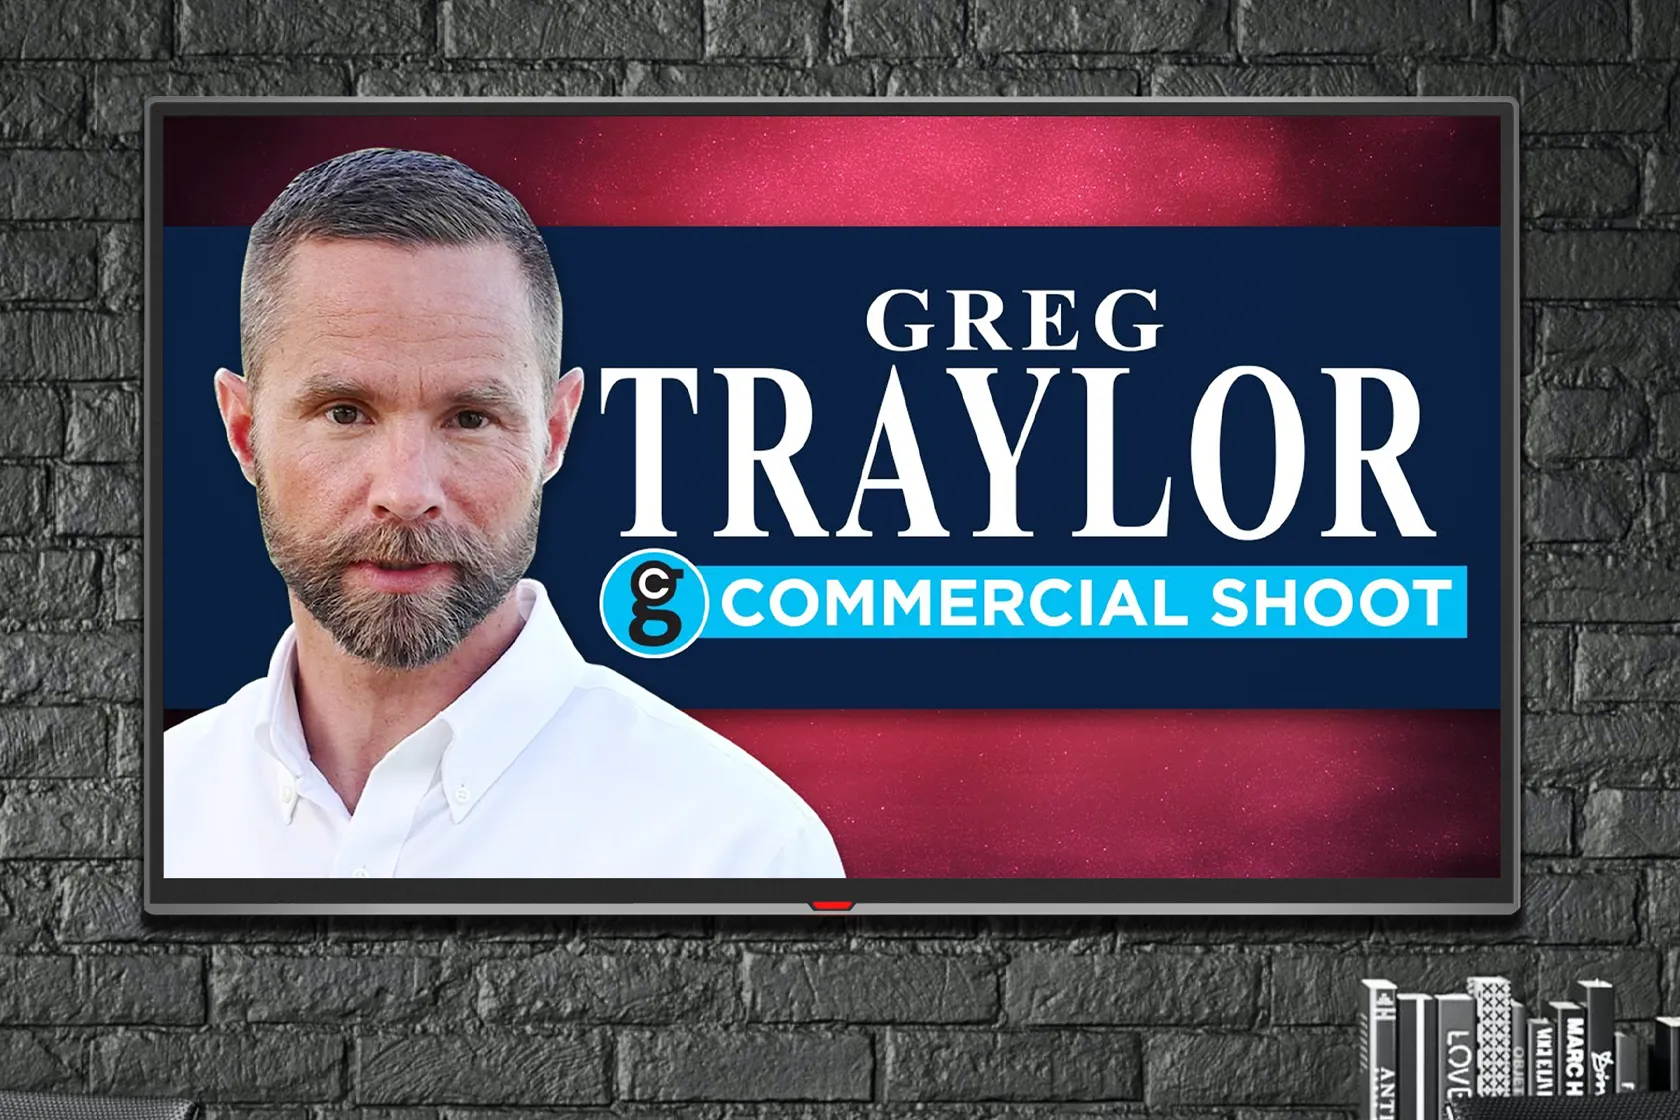 Greg Traylor TV Commercial Video on TV against a gray brick background